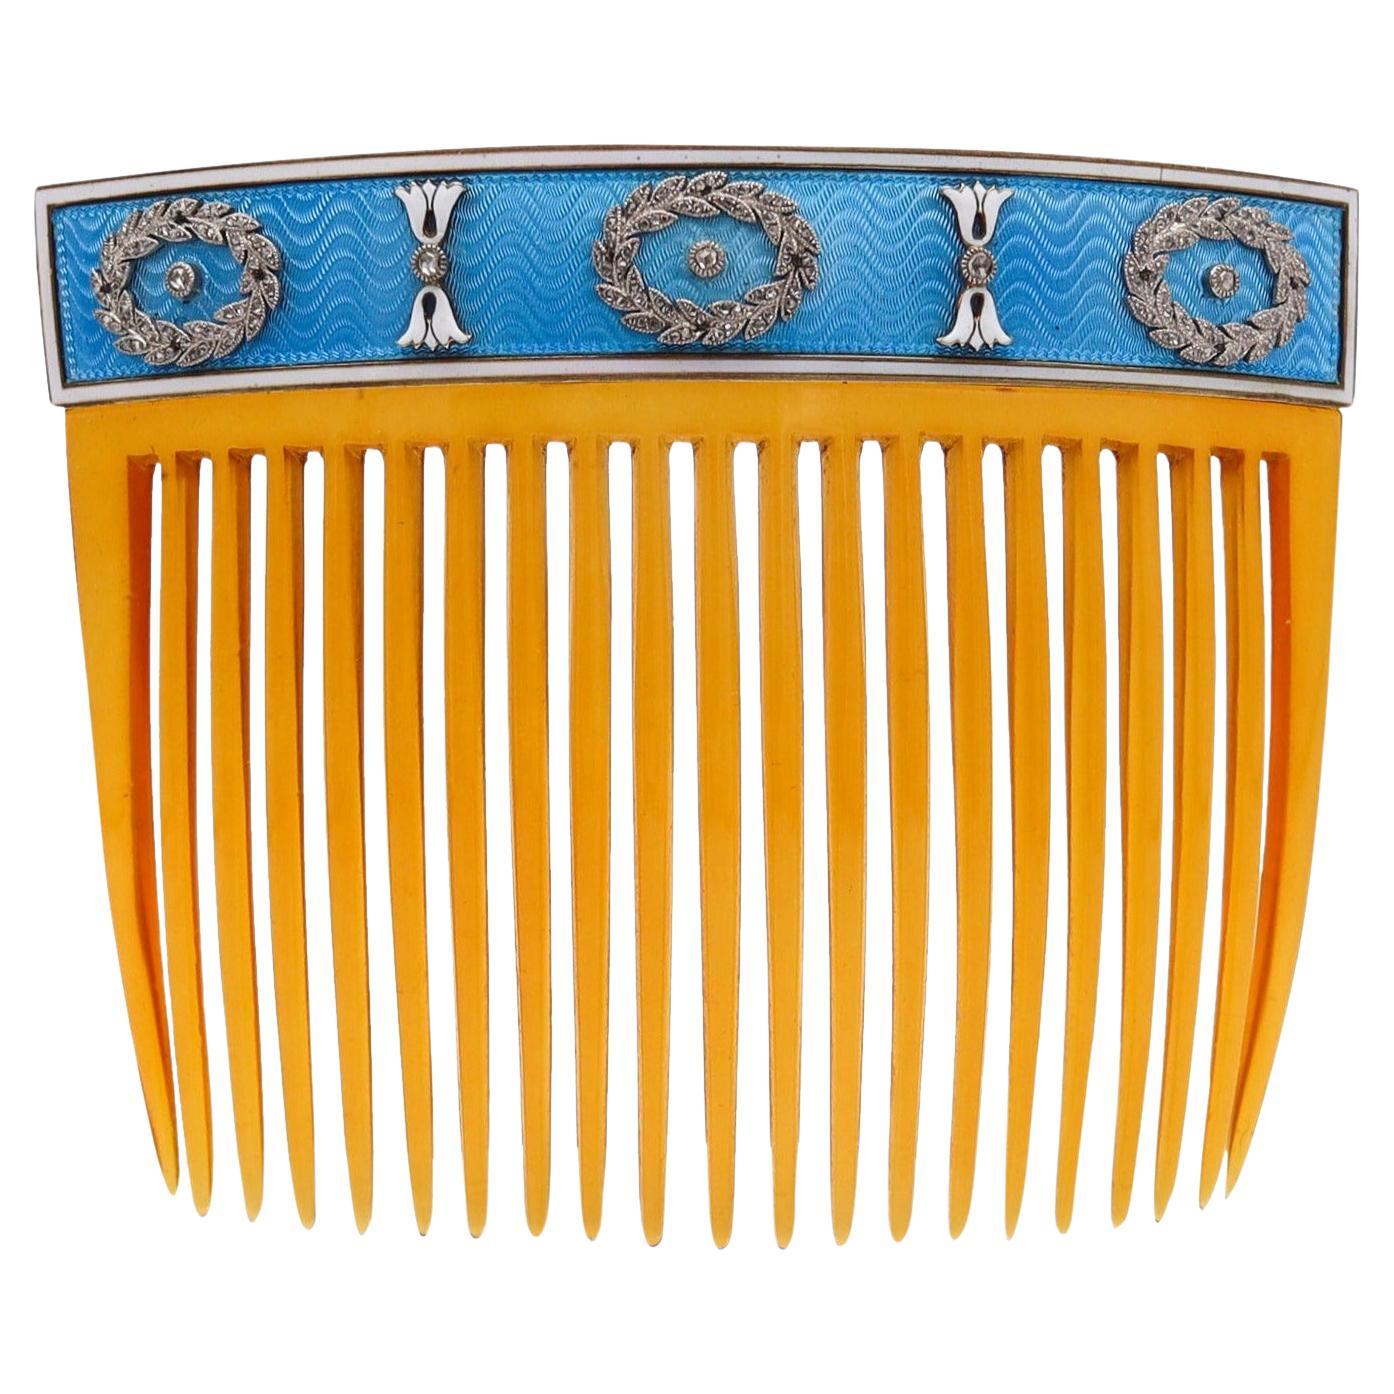 Cartier Paris 1900 Edwardian Enameled Hairs-Comb in 18Kt Gold With Diamonds For Sale